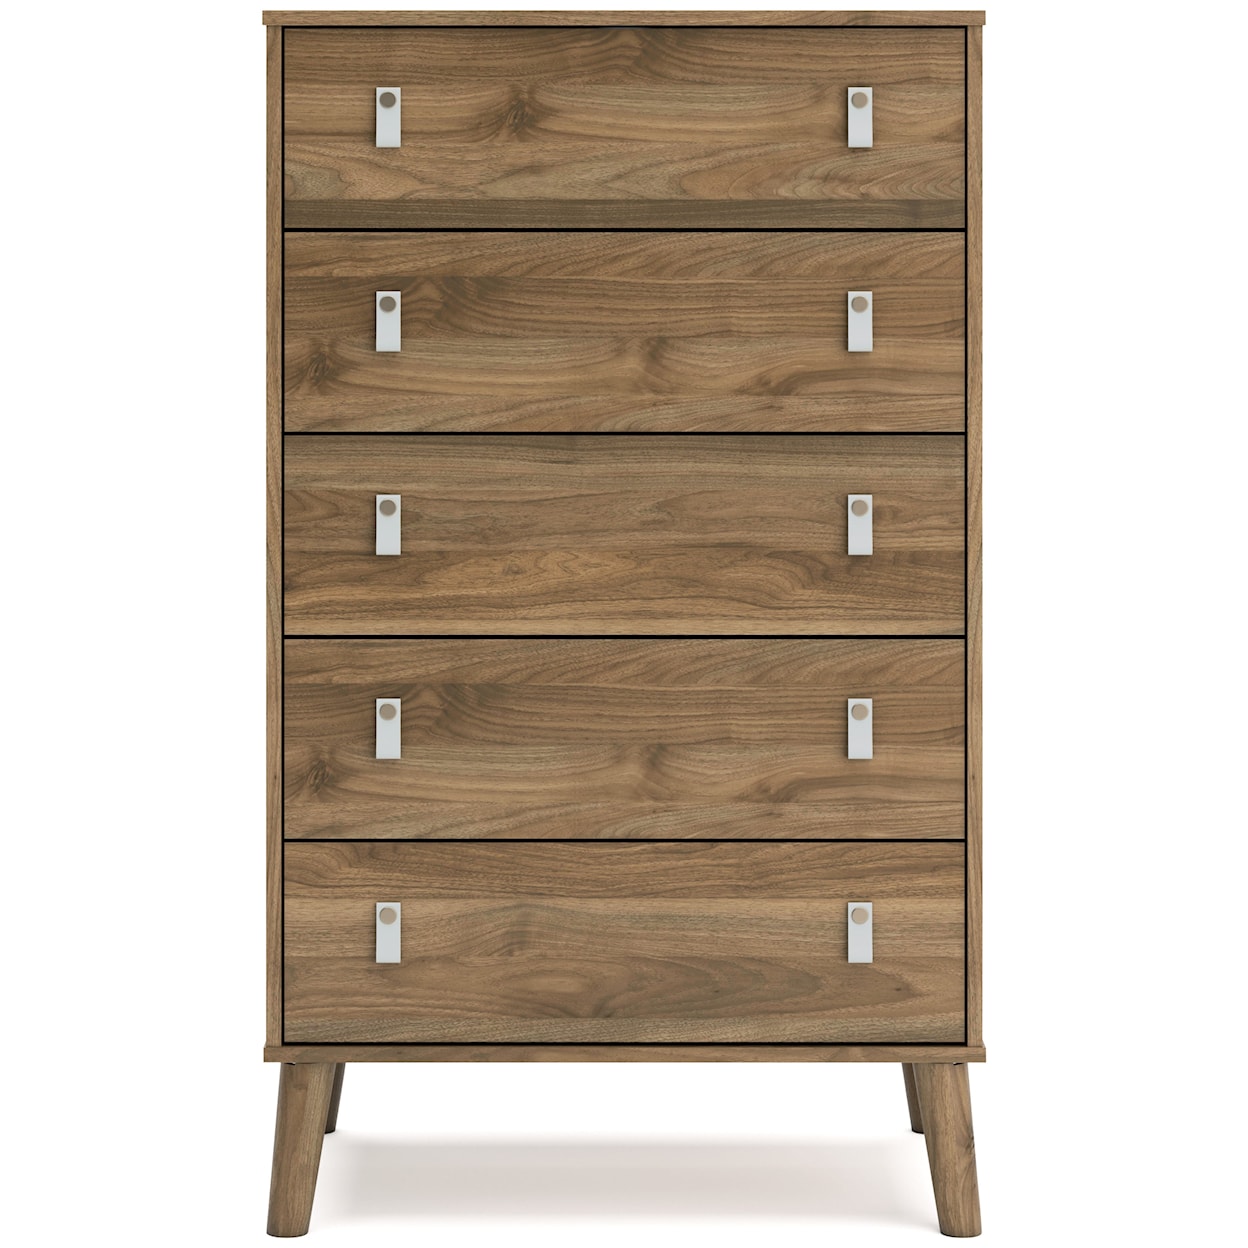 Ashley Signature Design Aprilyn Chest of Drawers